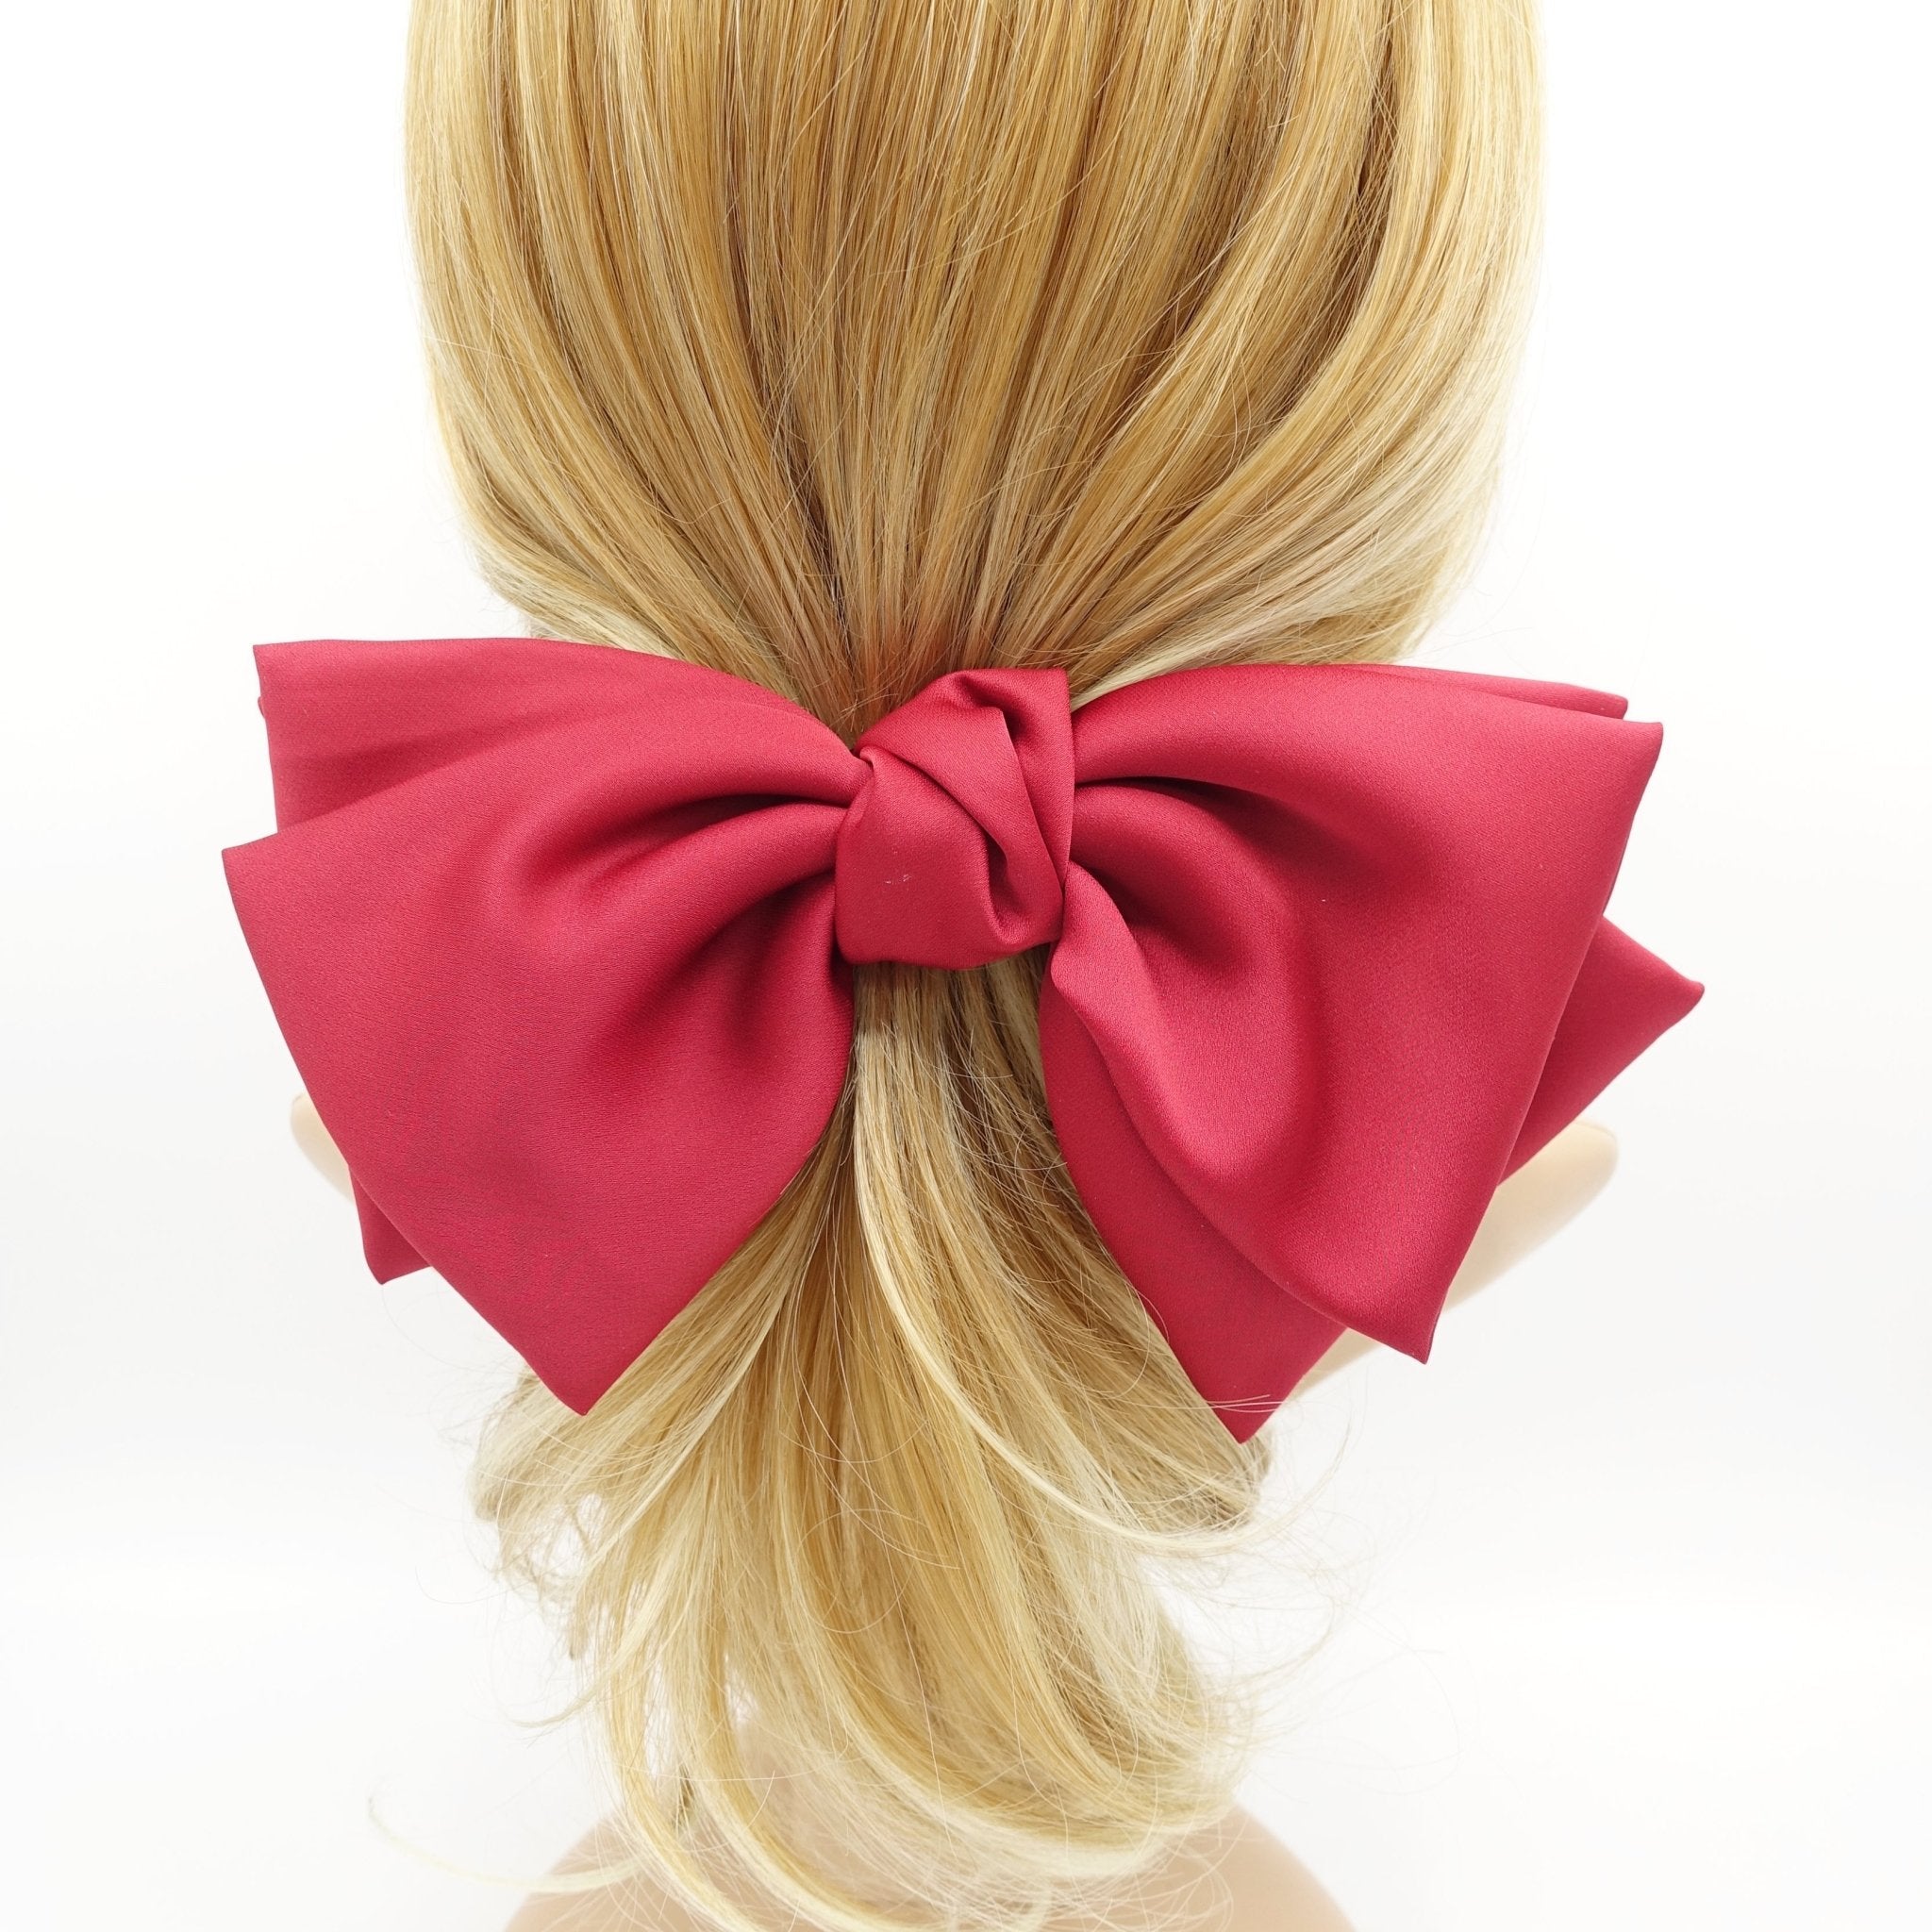 veryshine.com claw/banana/barrette Red big triple wing hair bow satin double layered bow stylish women hair accessory